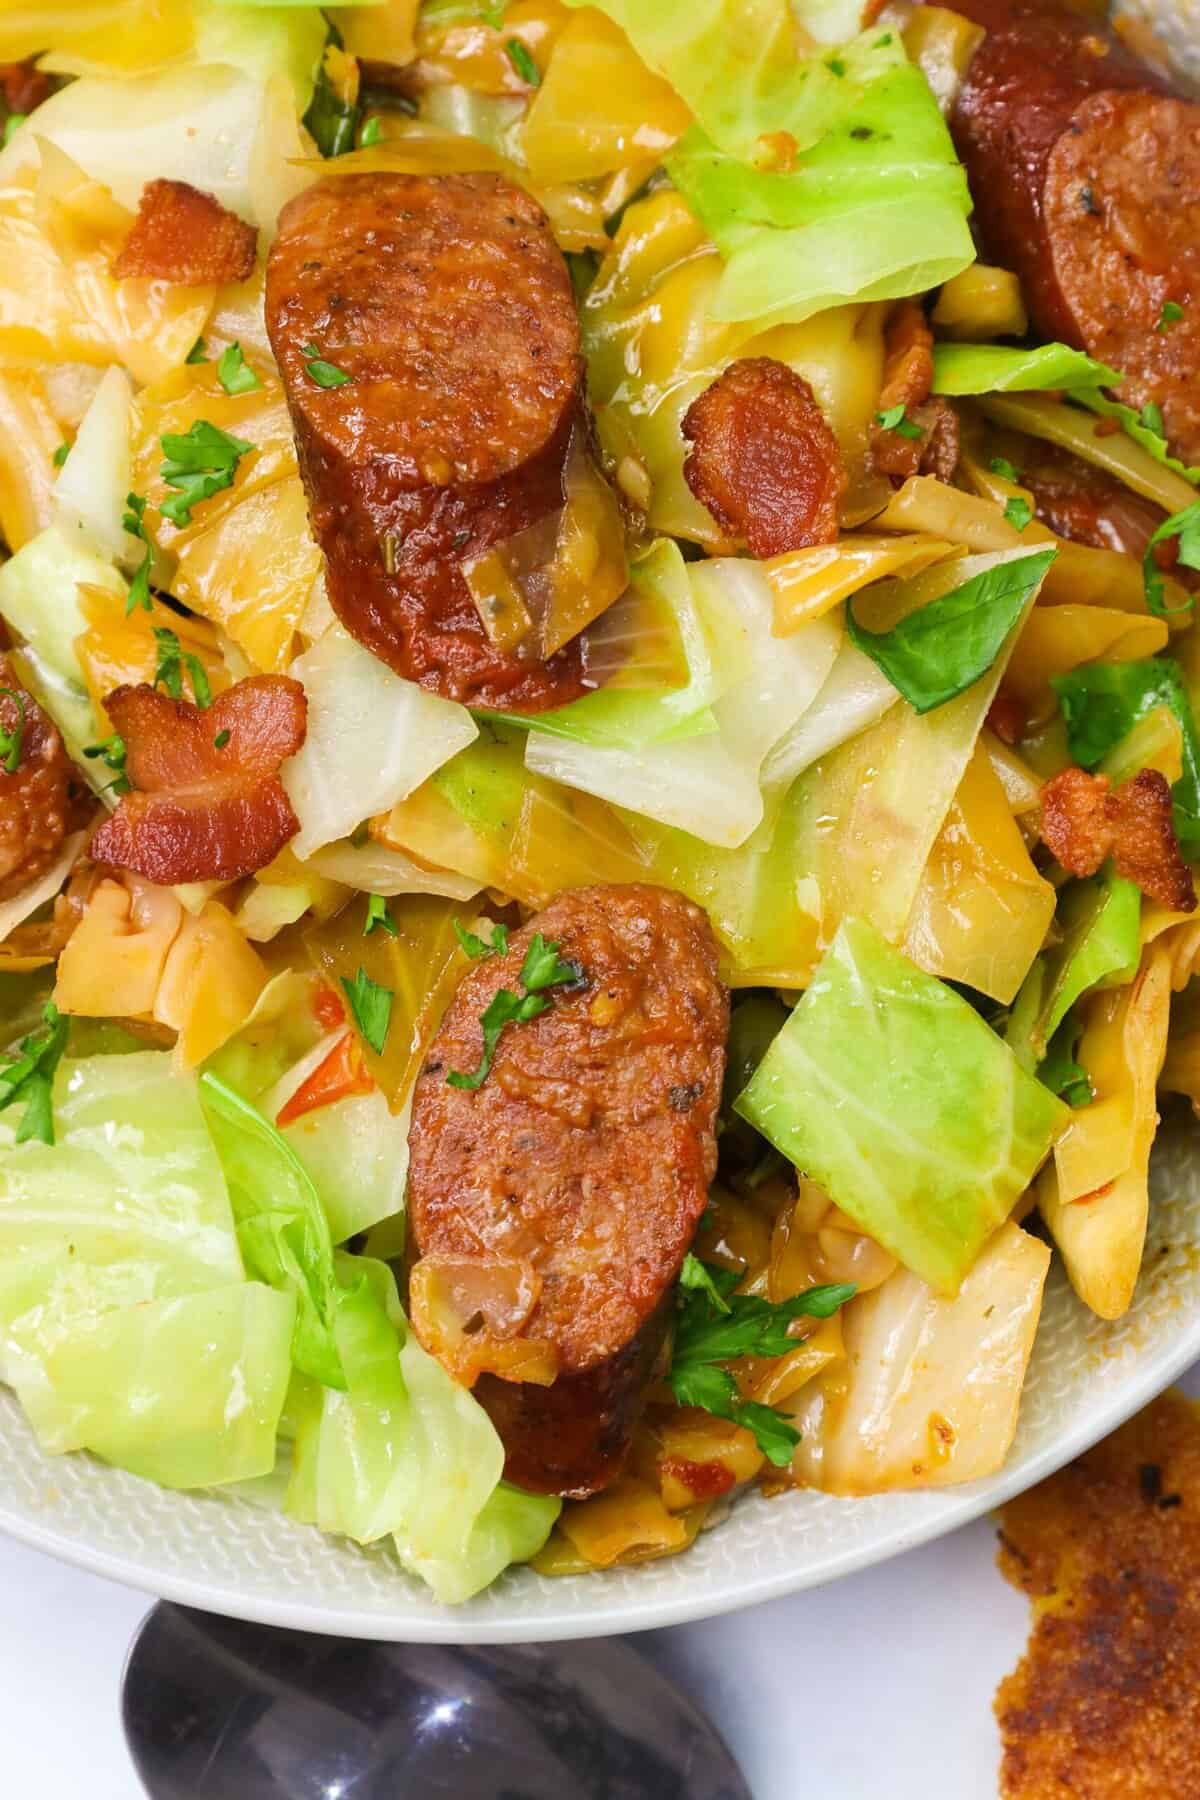 Serving up a soul food classic, cabbage and sausage